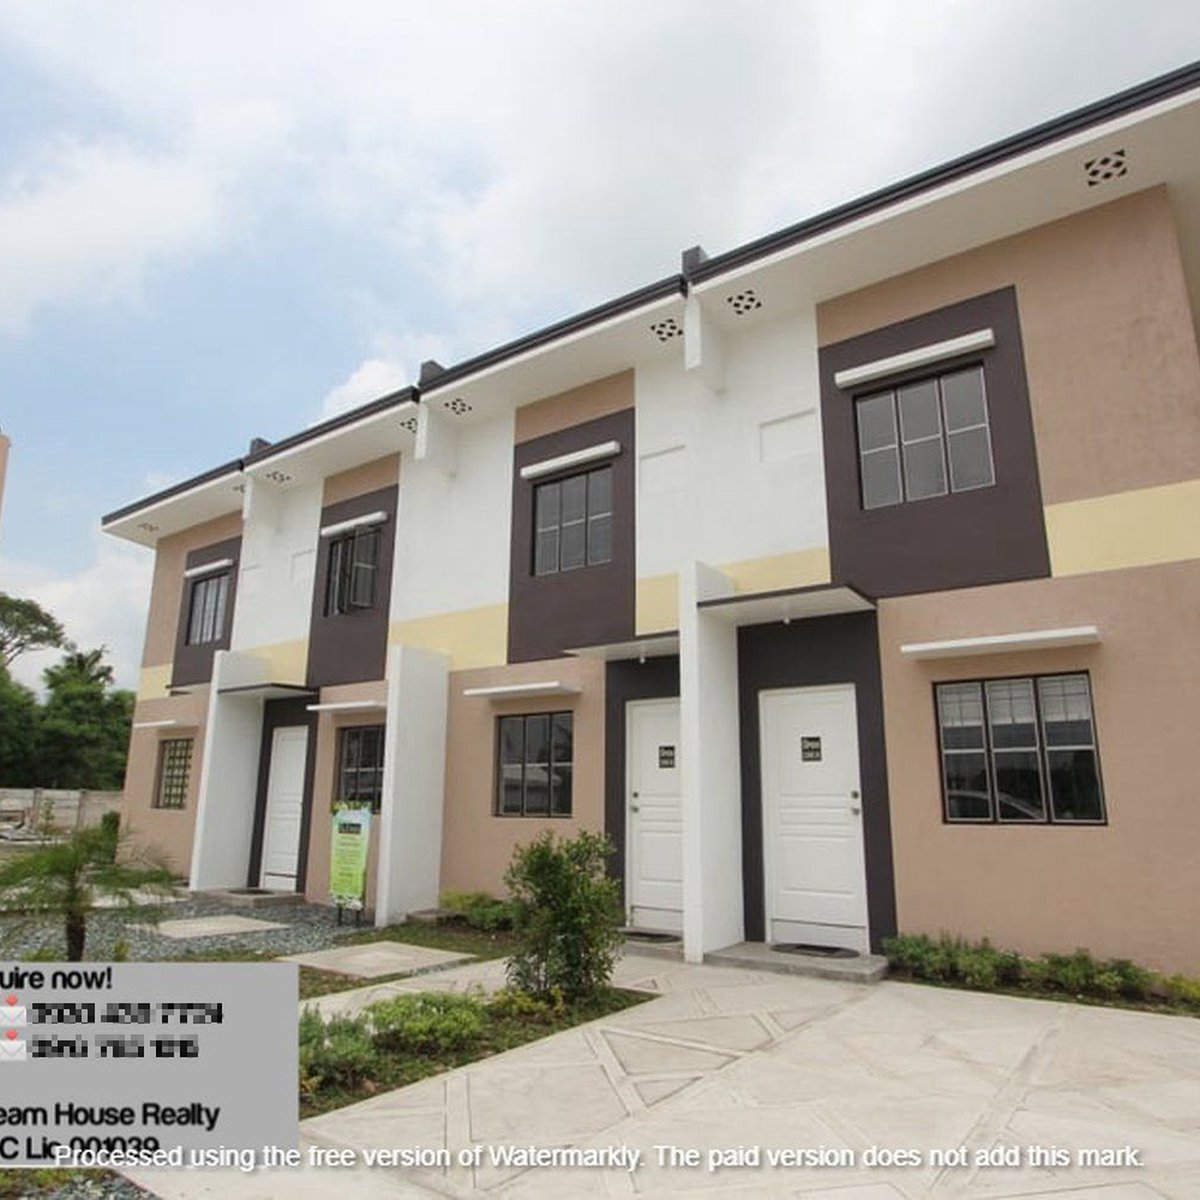 RFO/Preselling 2-bedroom Townhouse For Sale in Dasmarinas Cavite